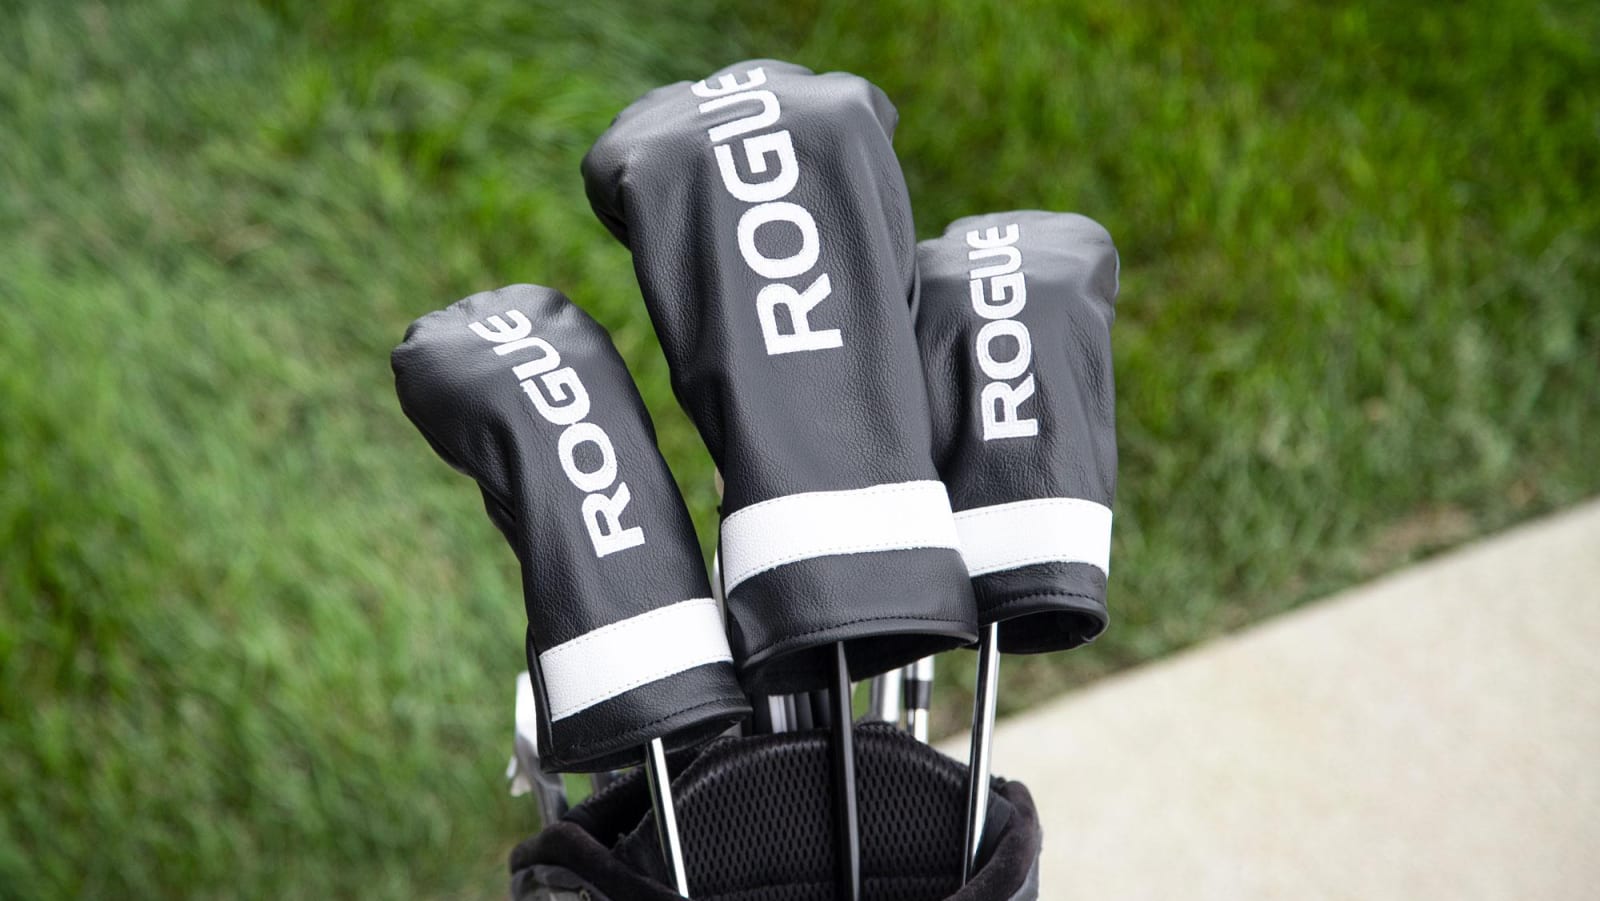 Putting Cover Reviews – Bringing You the Best Golf Putter Covers